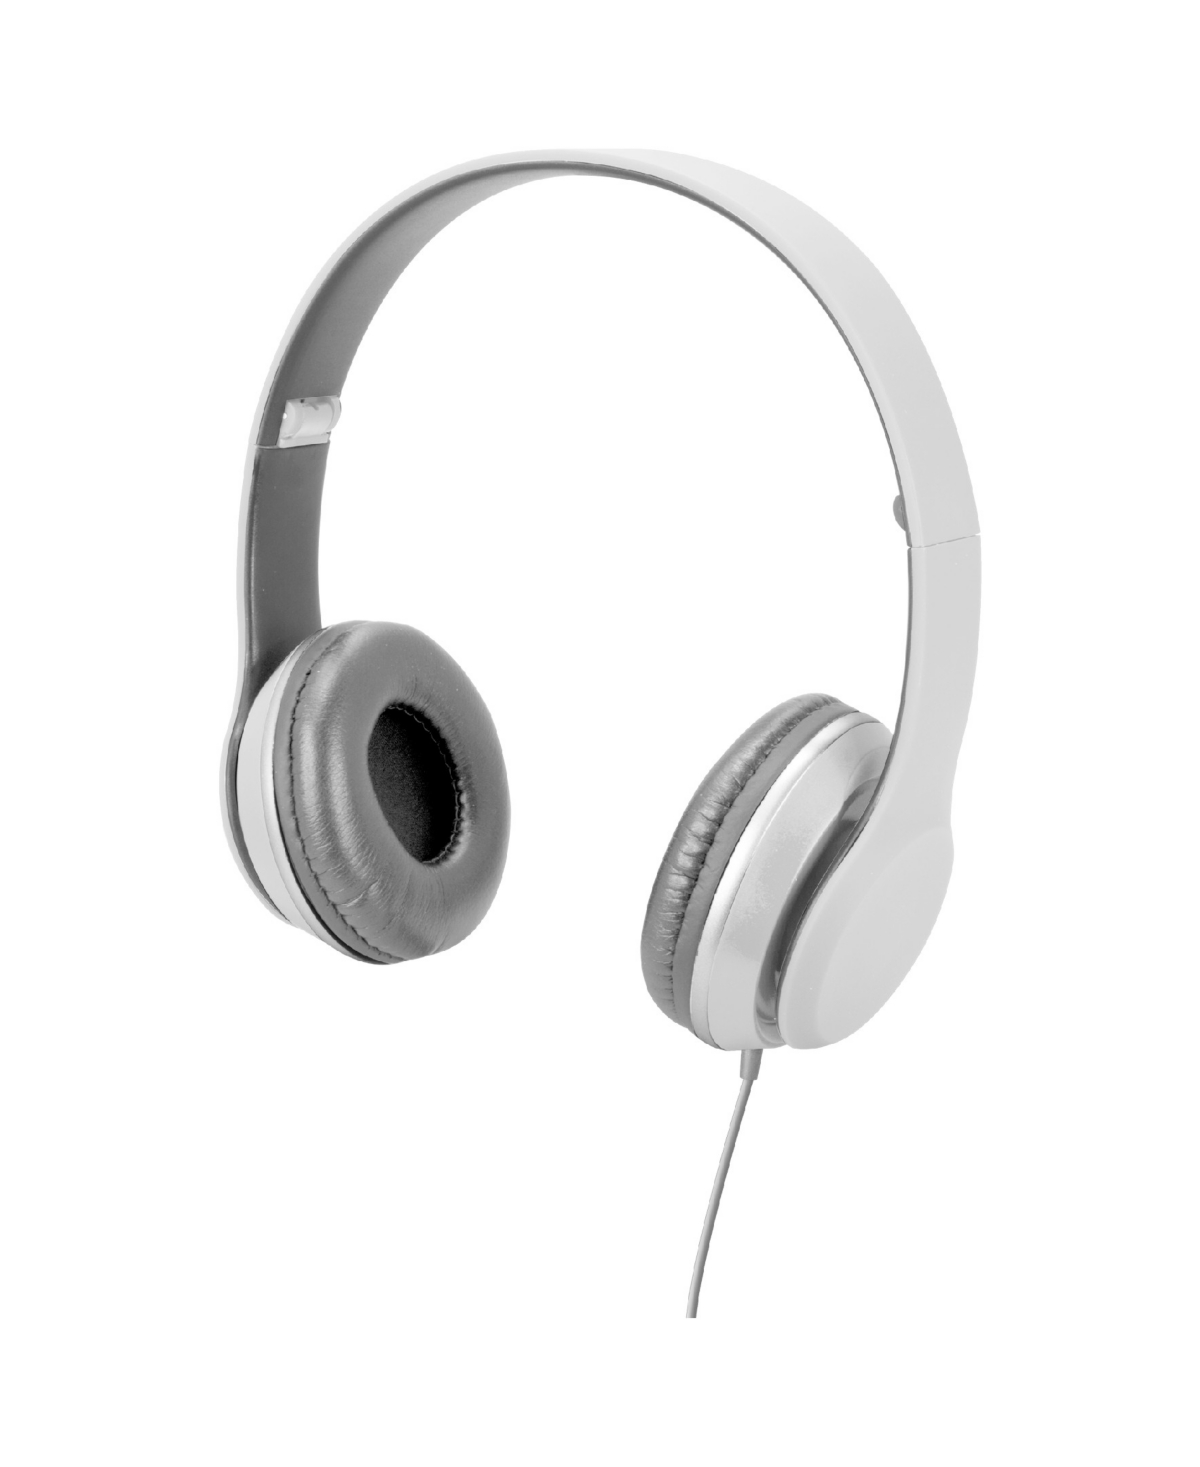 Ilive Foldable Wired Headphones, Iah57w In White